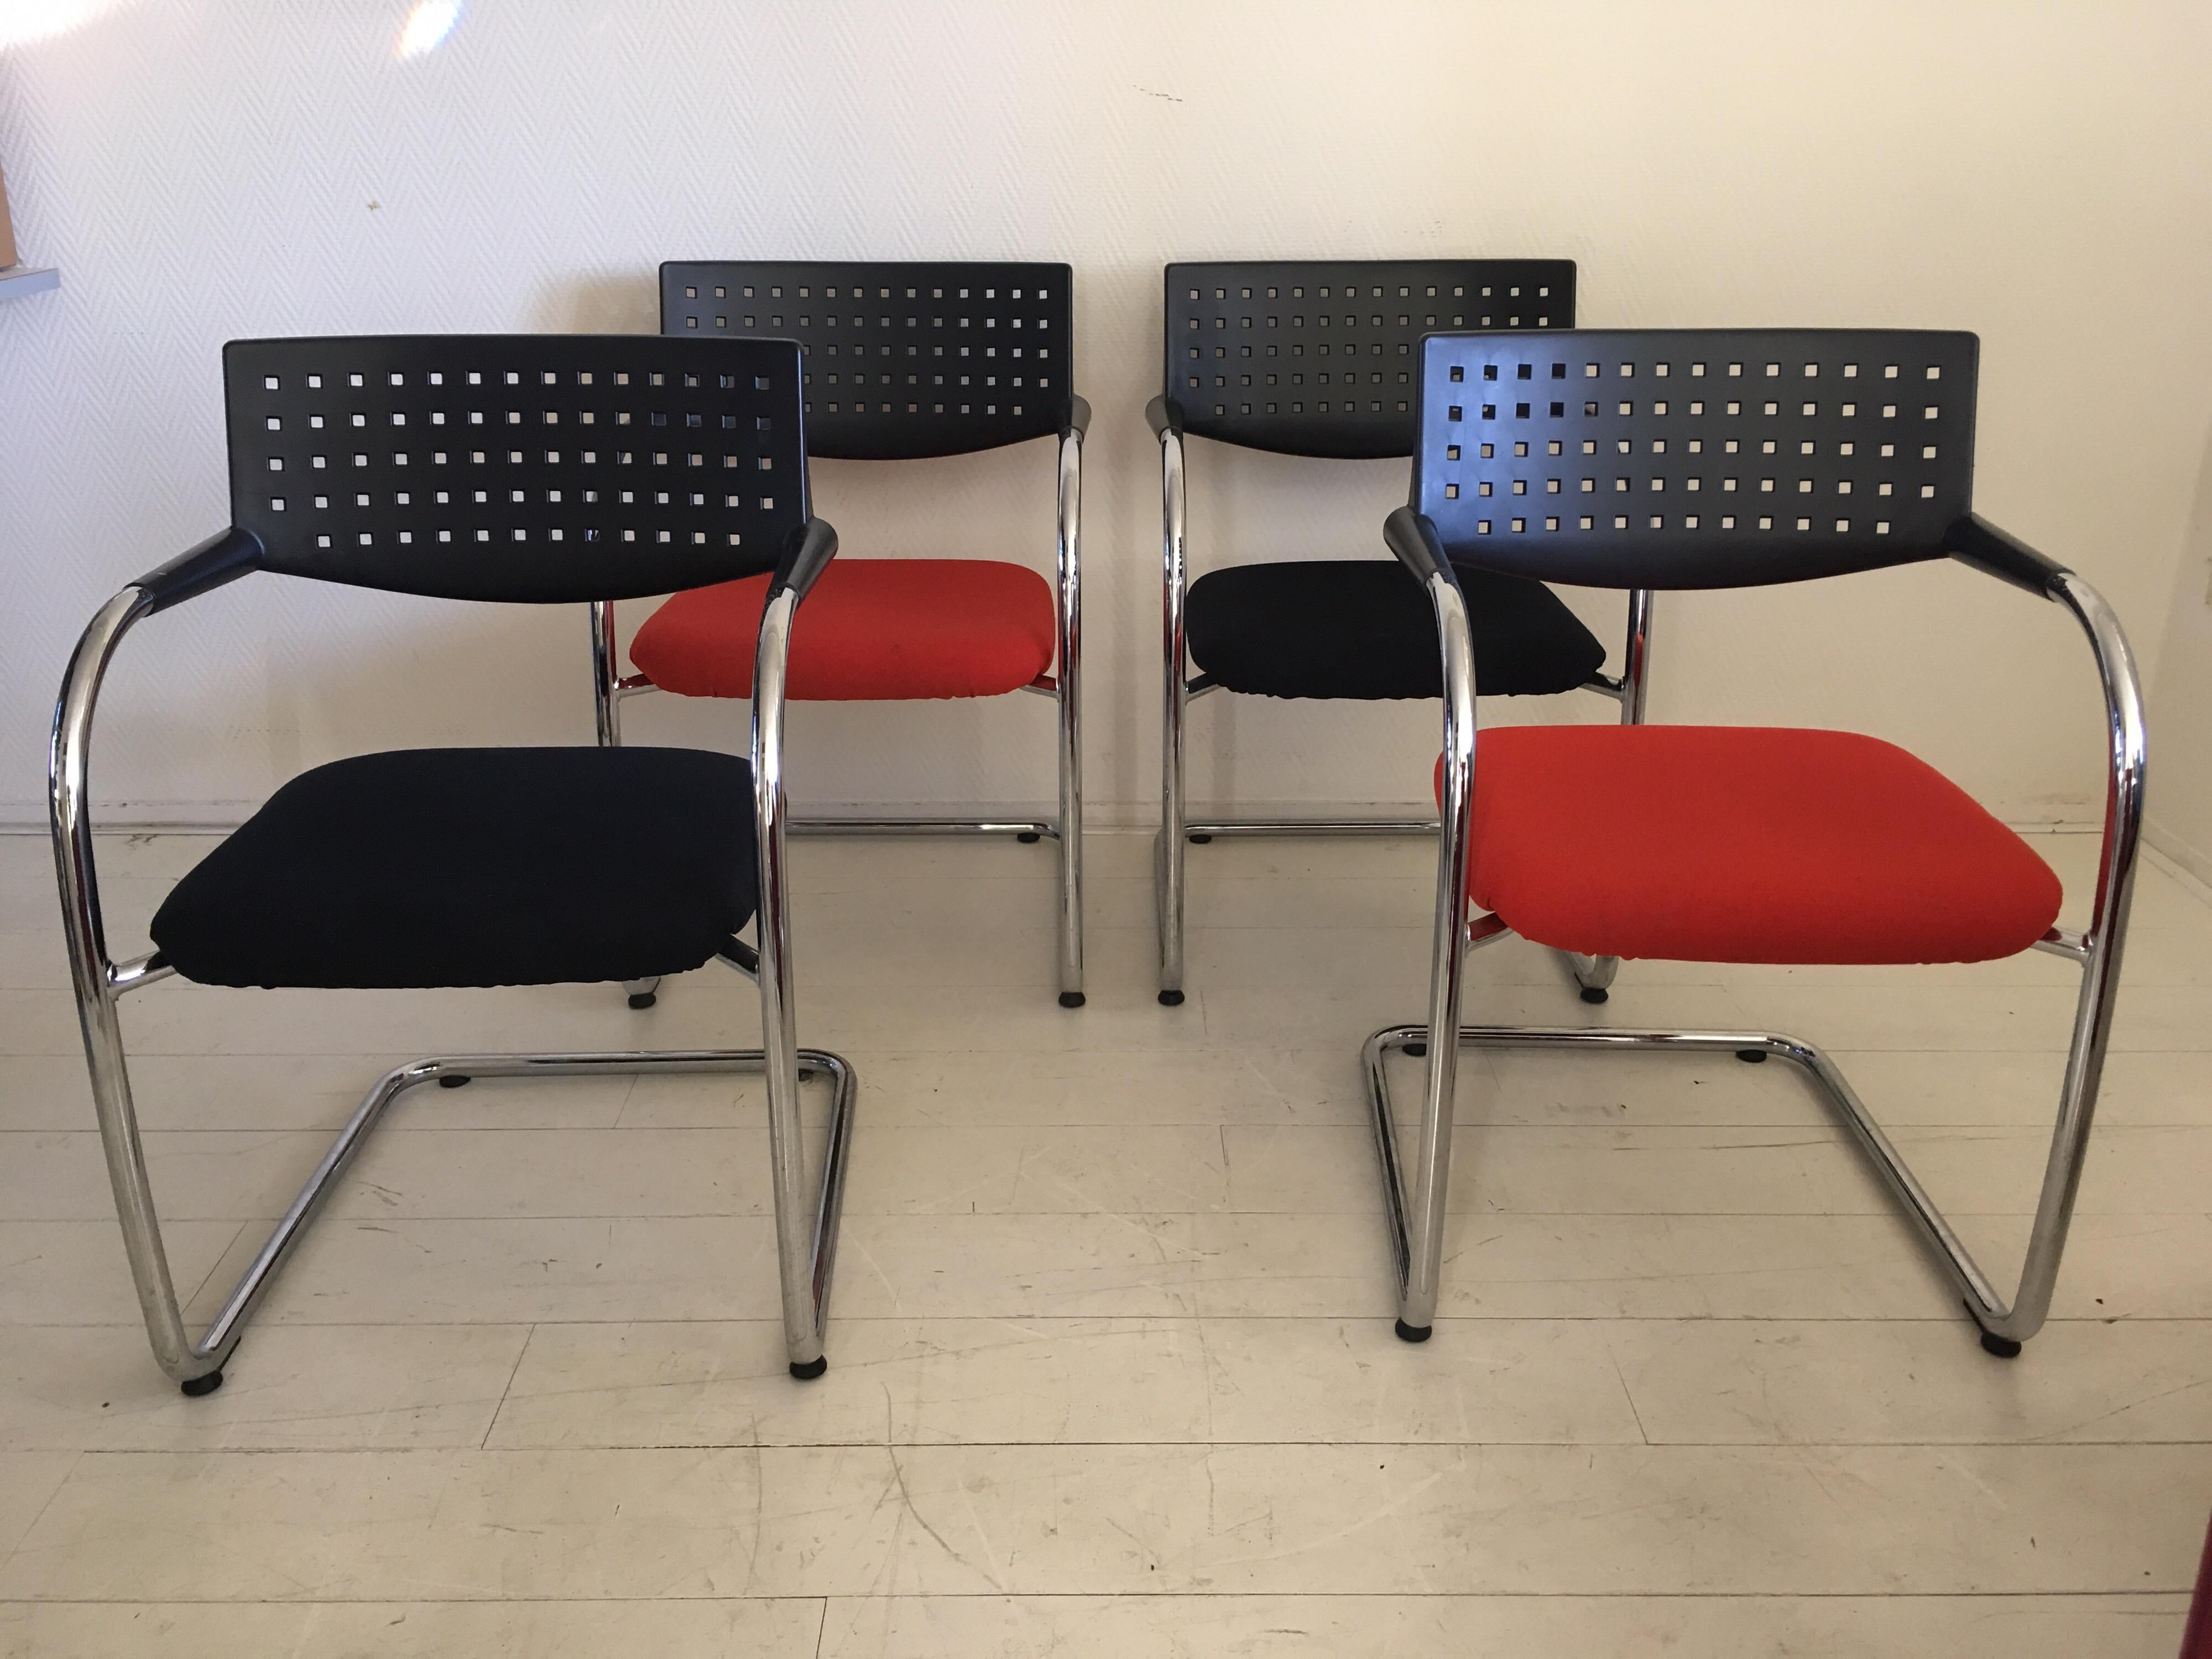 Set of four conference chairs designed by Antonio Citterio and Olivier Low for Vitra. The chairs, which are upholstered in black and red fabric remain in very good condition with some wear to the fabric as stains. They could be cleaned or easily be